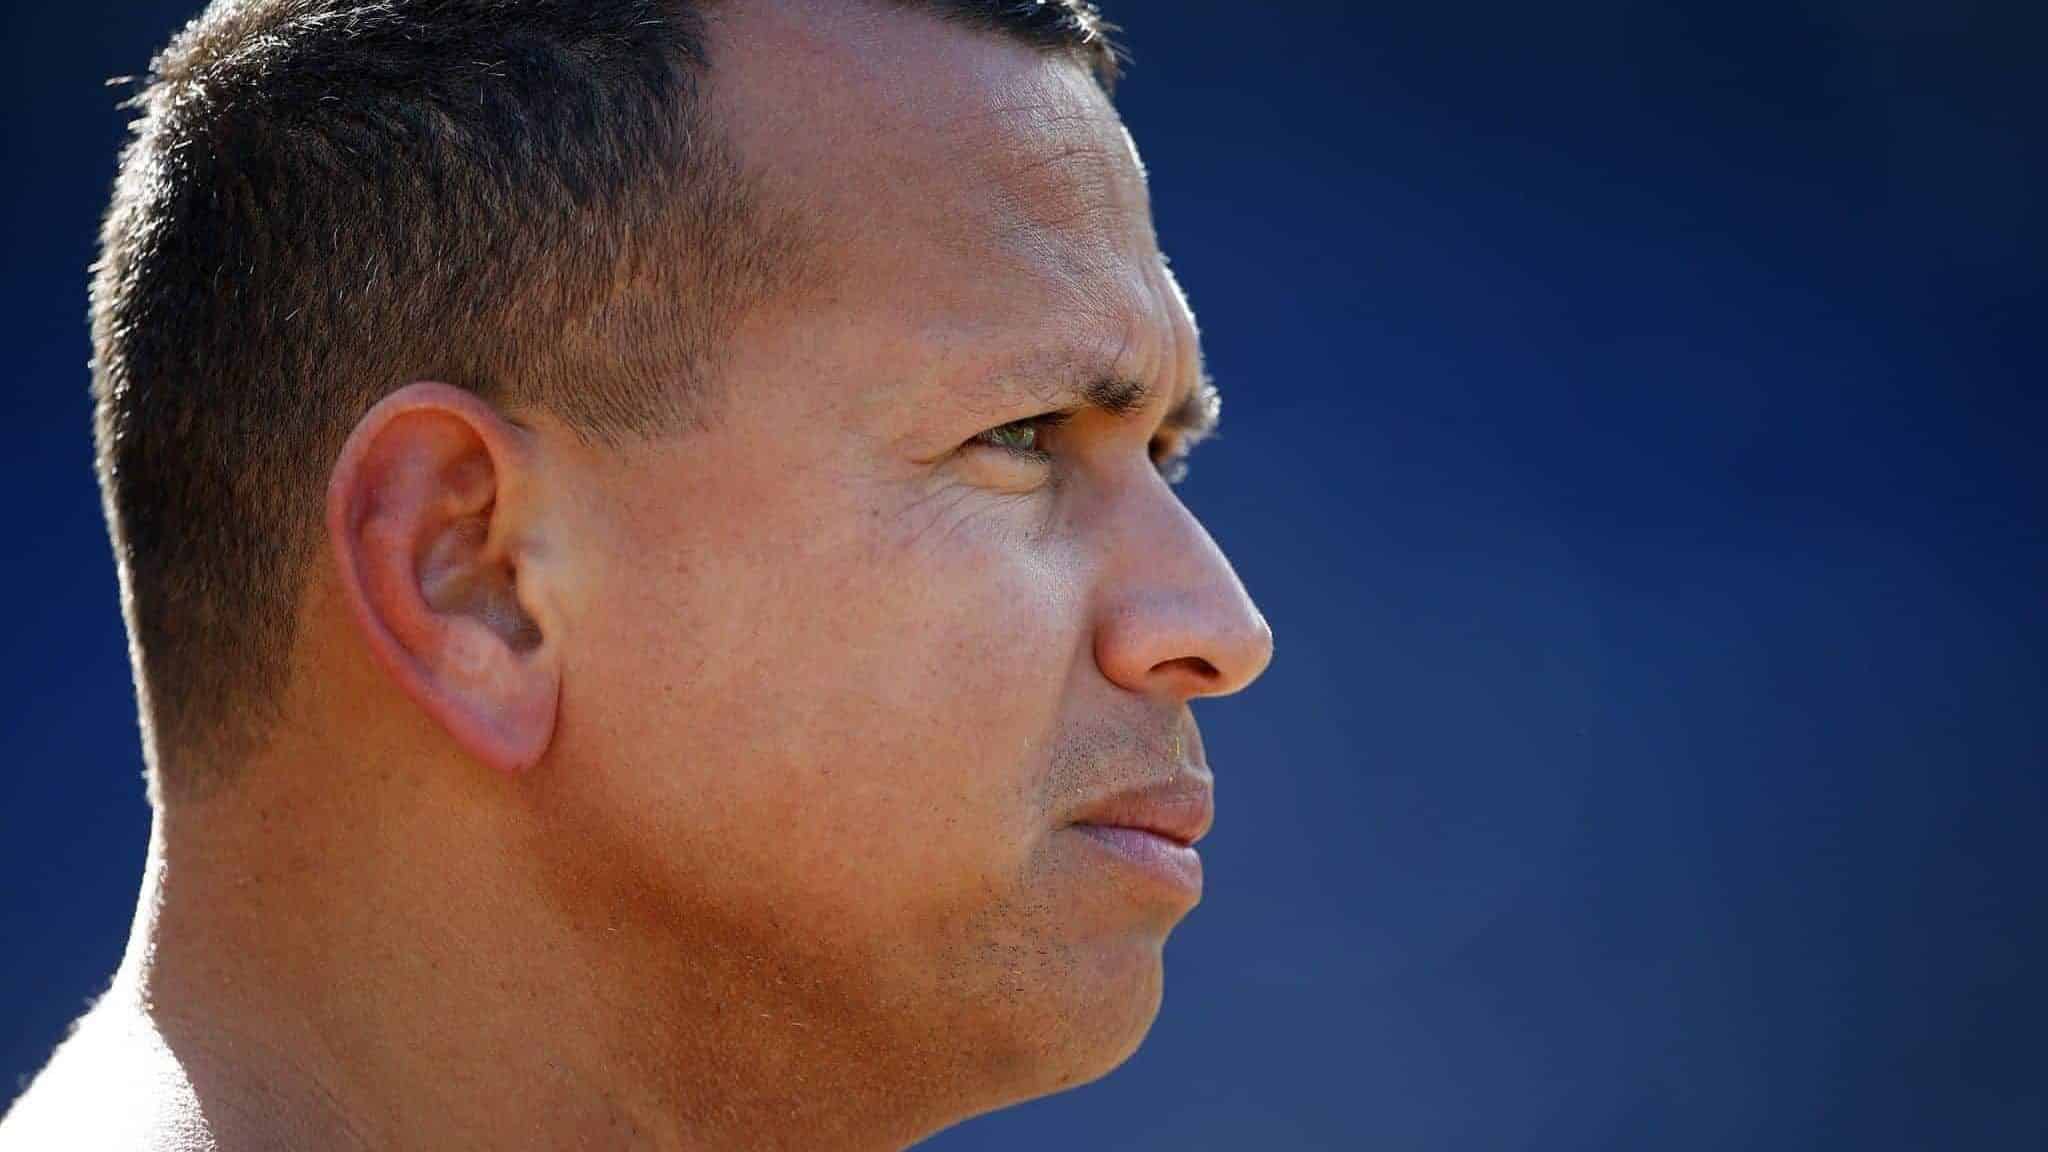 Potential New York Mets owner Alex Rodriguez